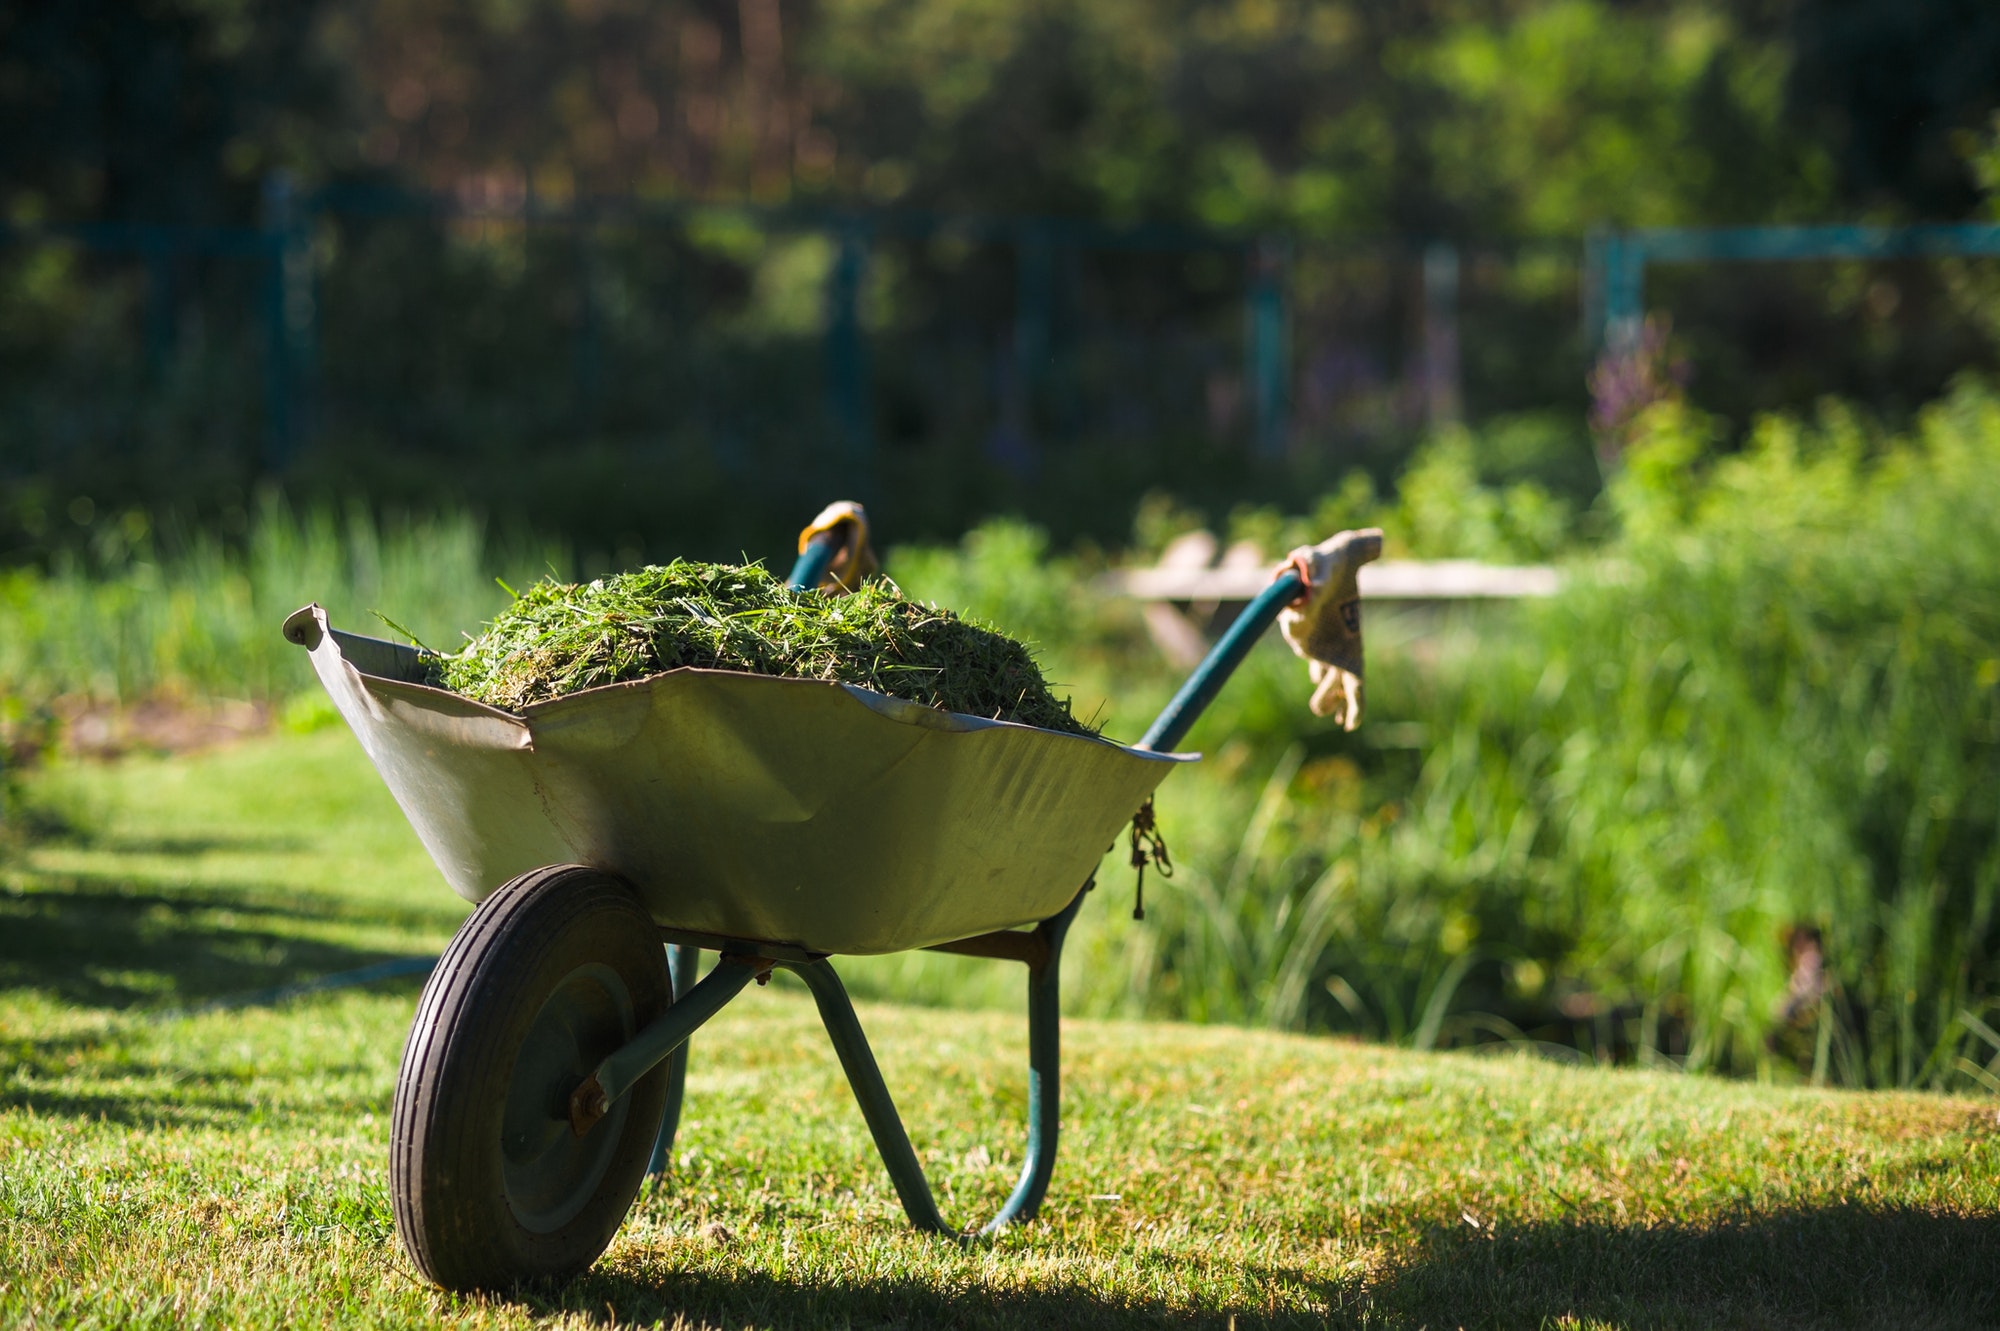 Heavily used wheelbarrow full of mowed grass standing on the freshly cut lawn